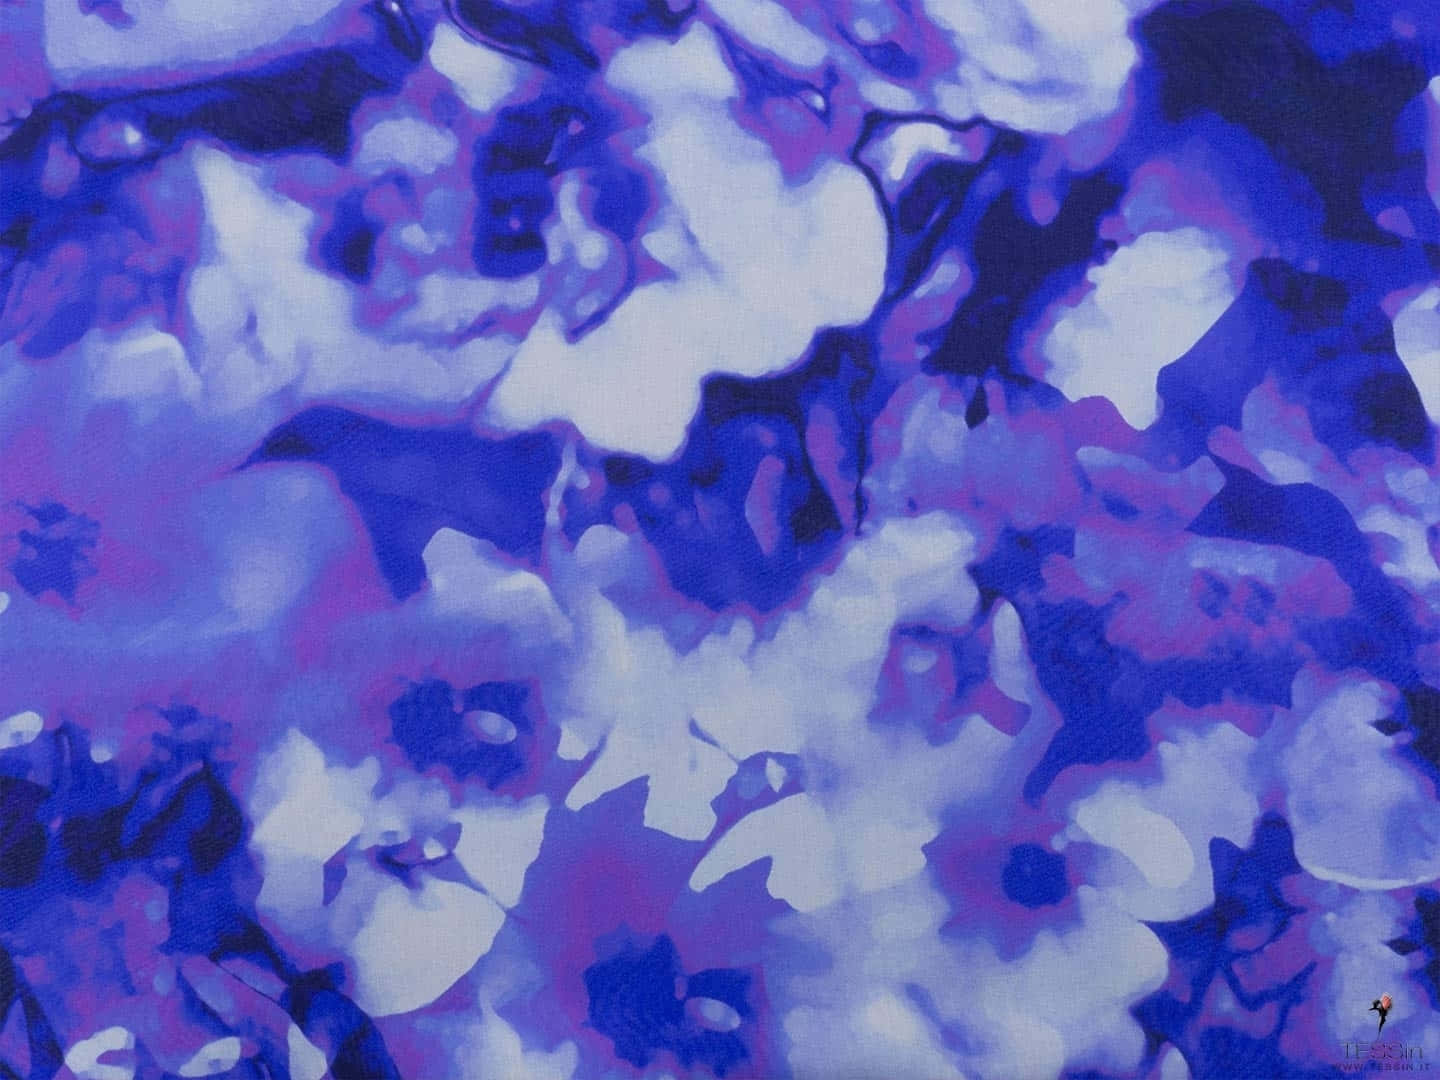 An Image of a Bright Periwinkle Blue Wallpaper